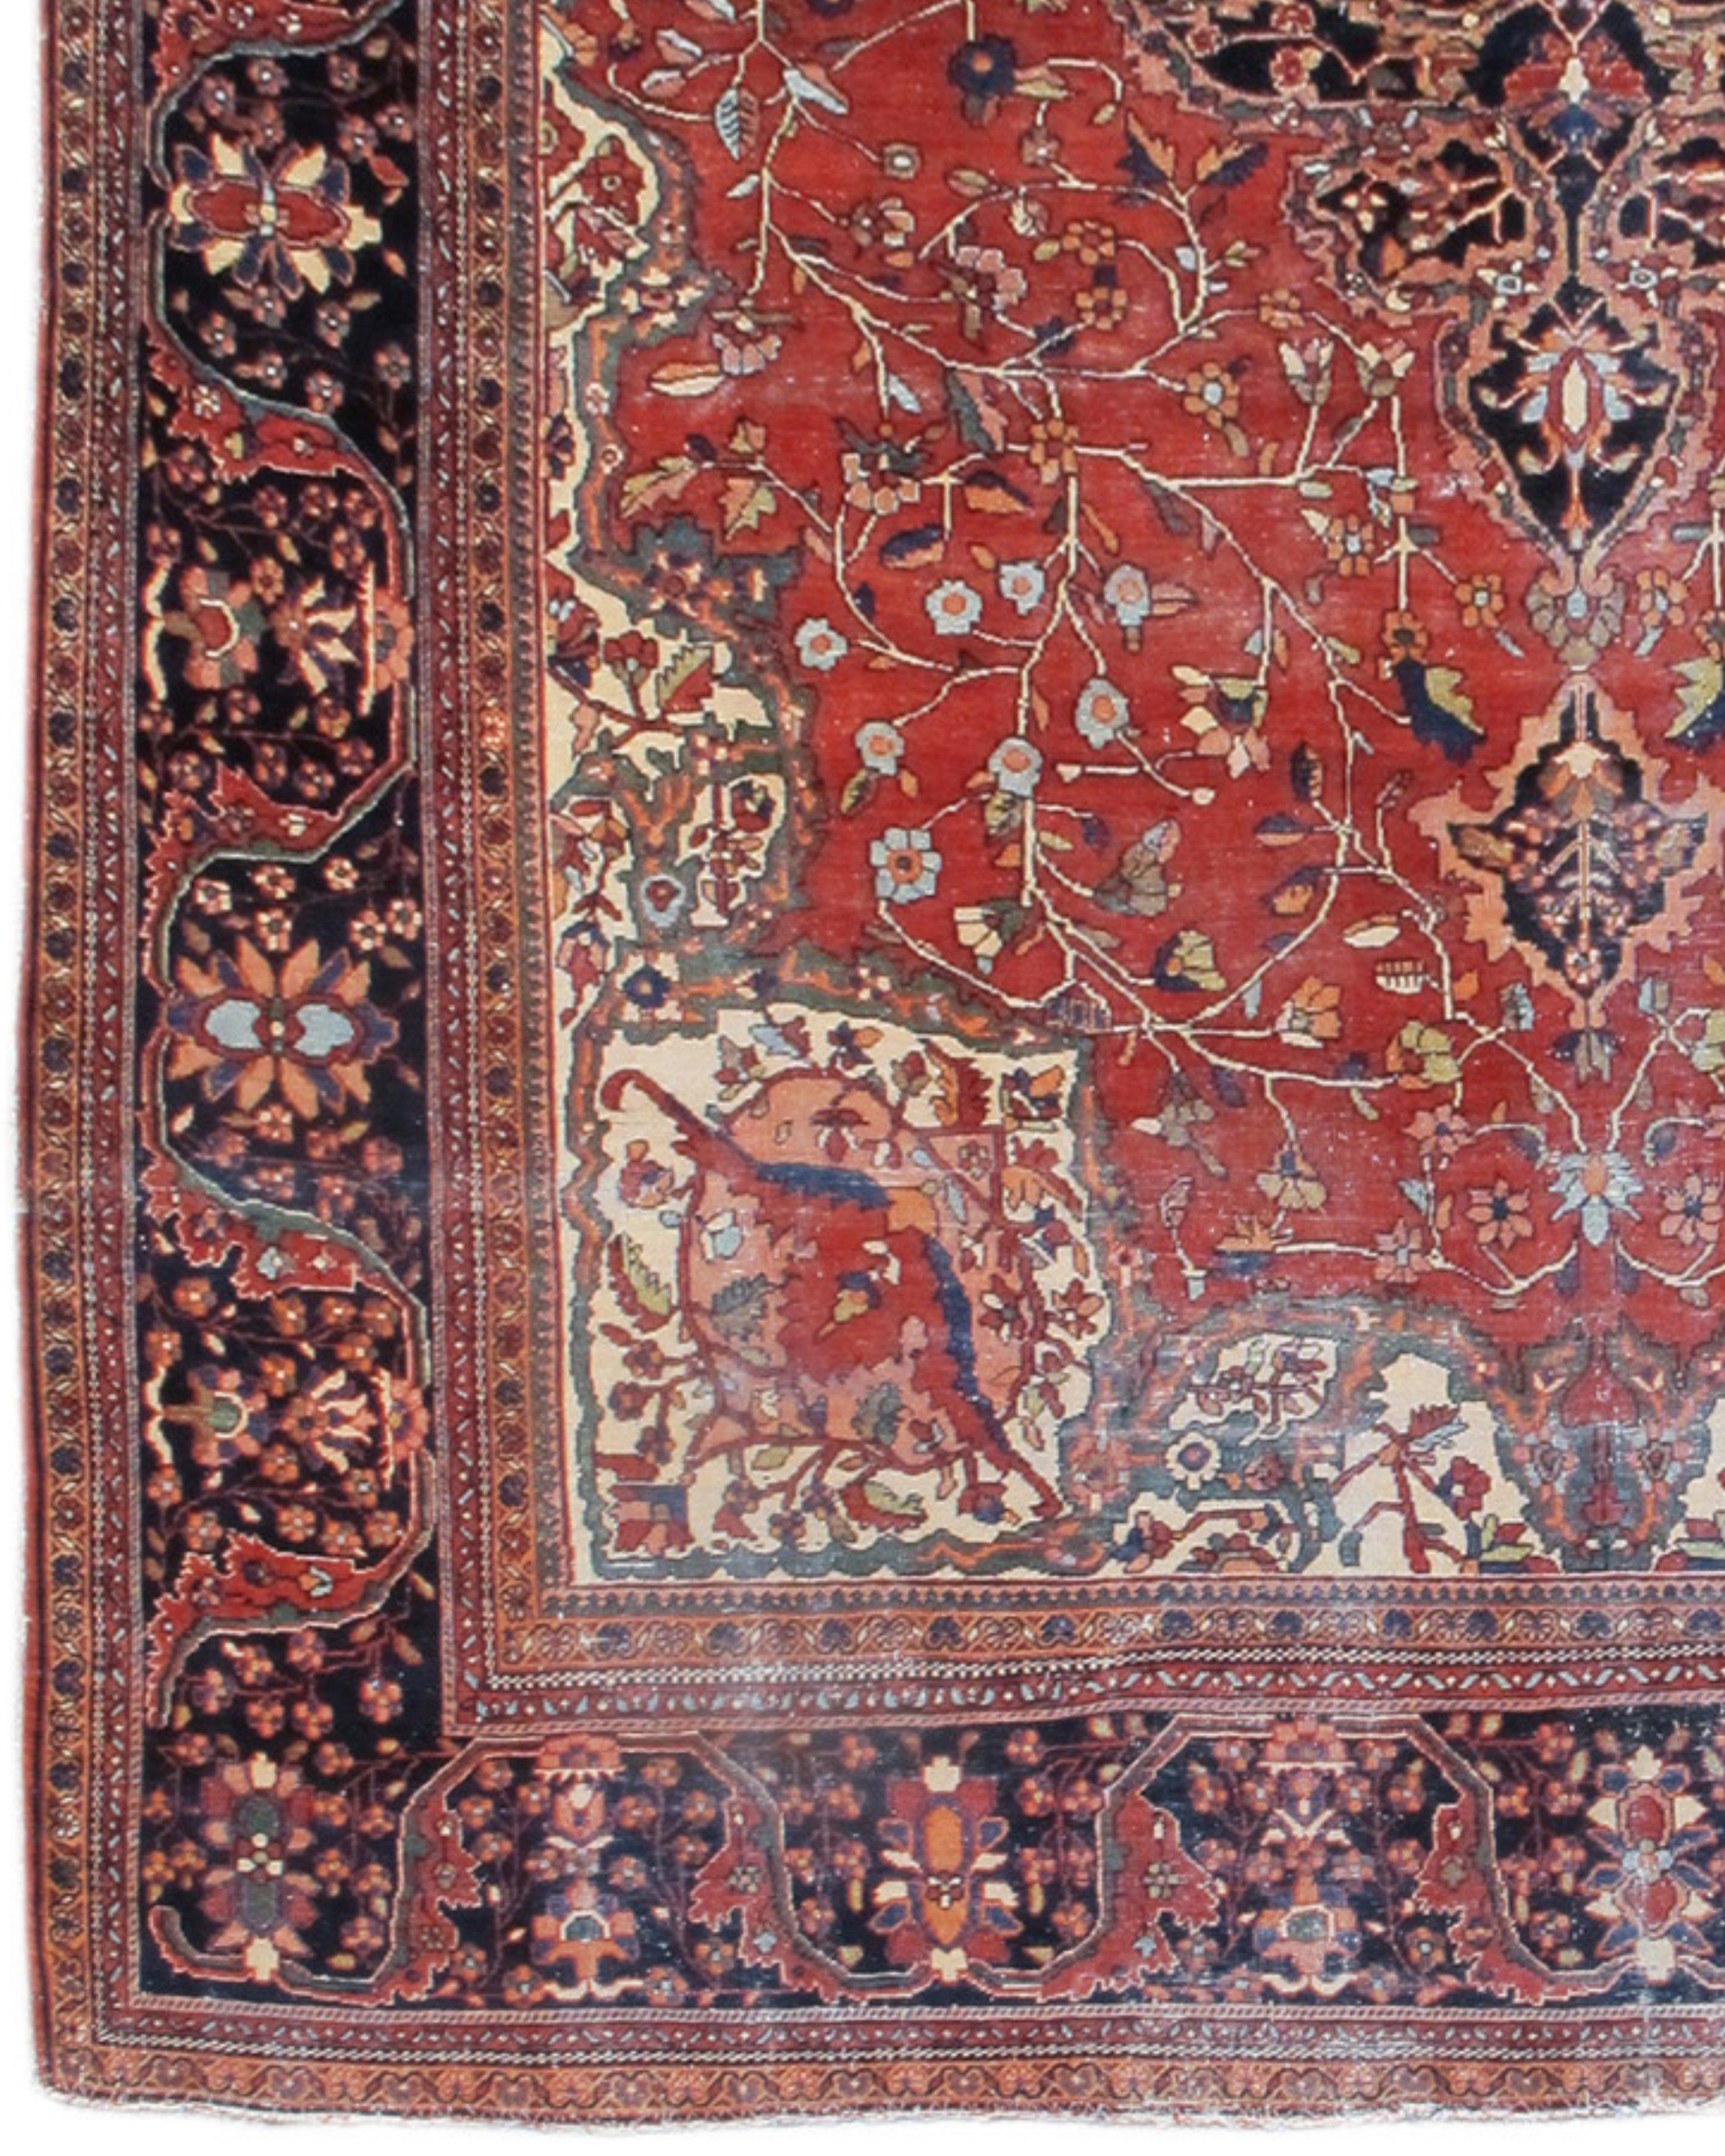 Hand-Knotted Fereghan Sarouk Rug, c. 1900 For Sale